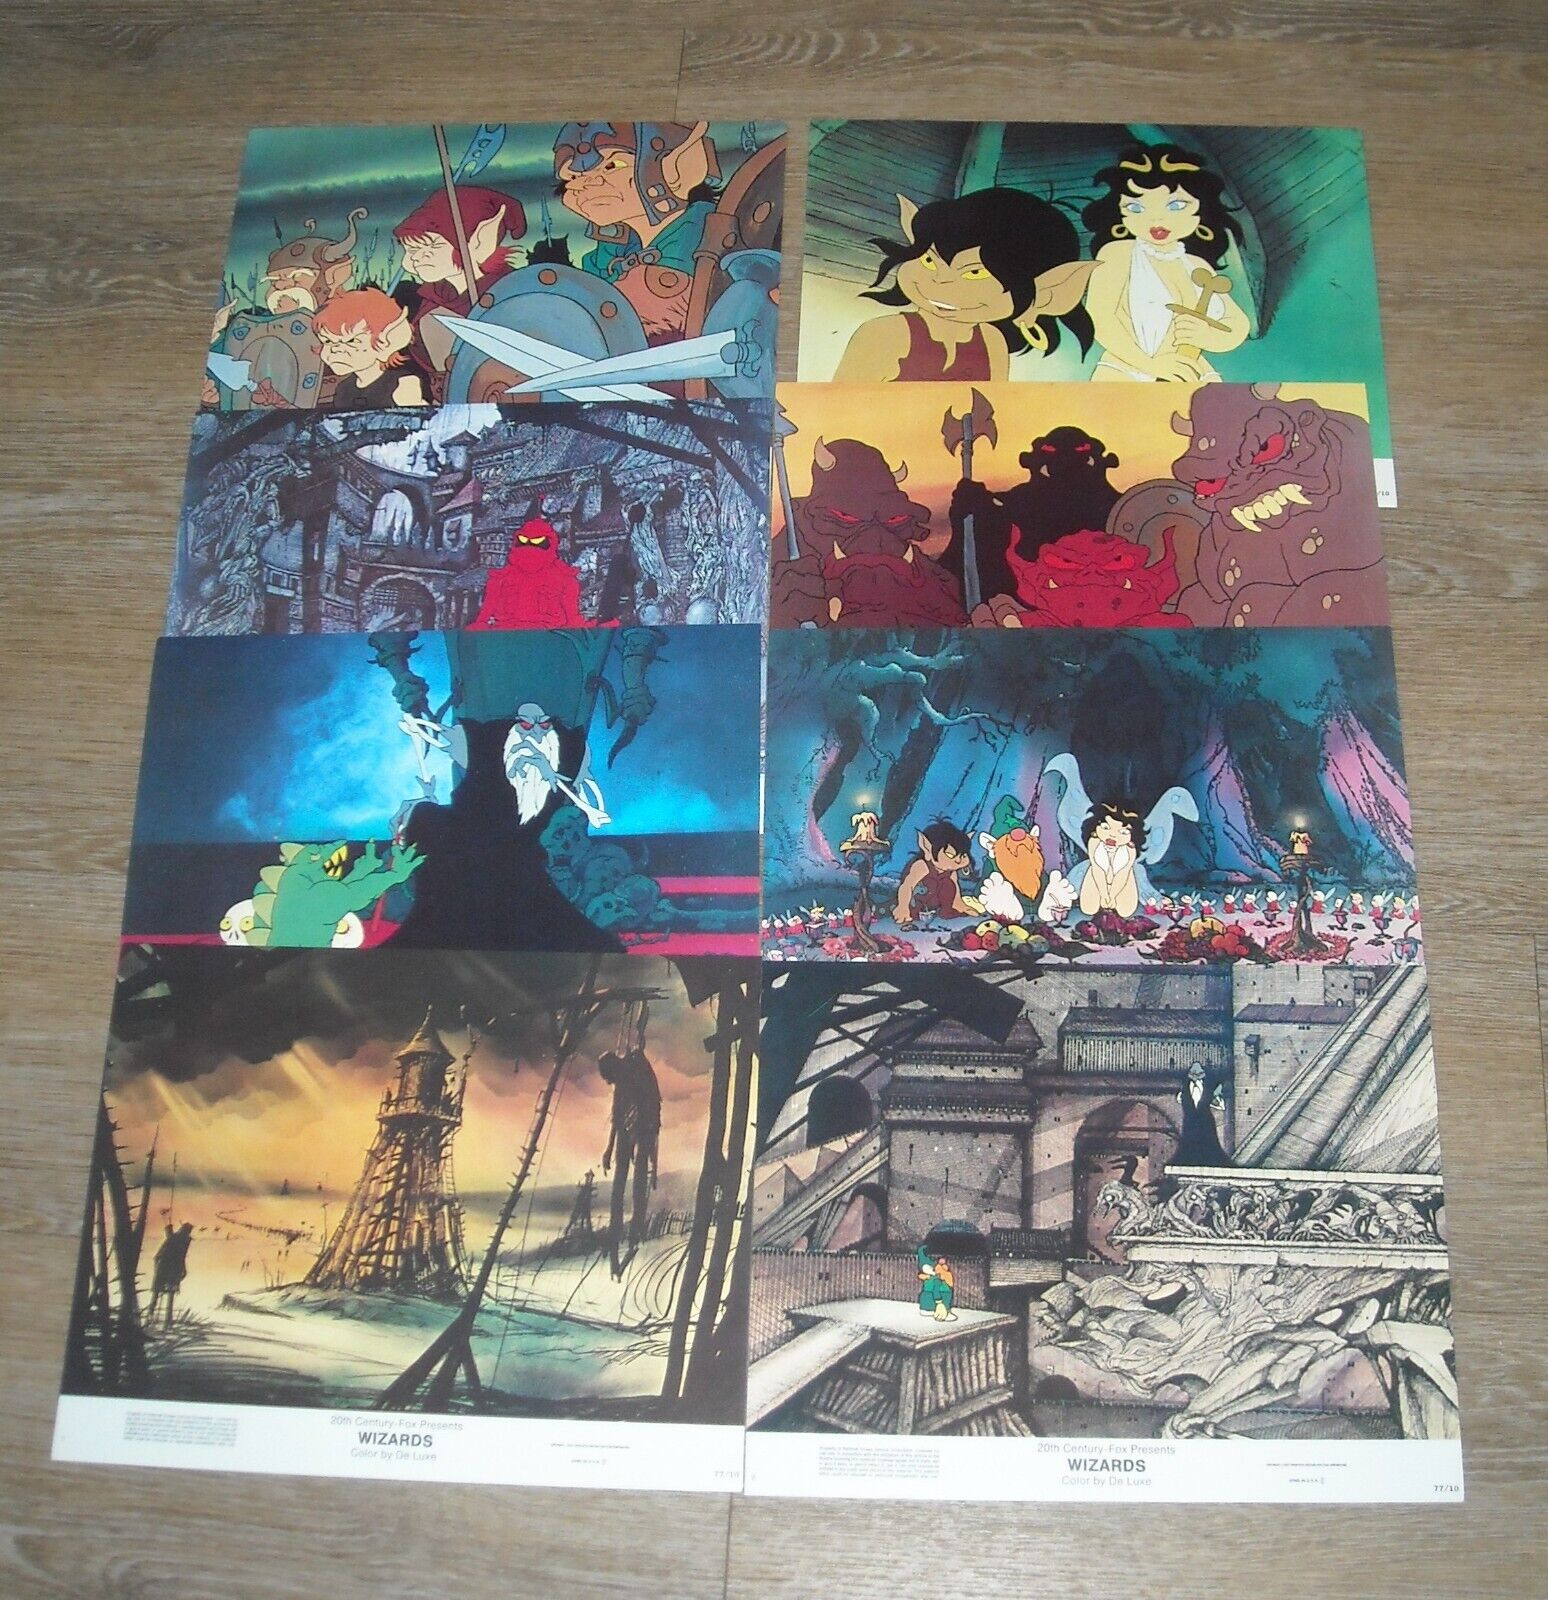 1977 Wizards Complete Set Of 8 Numbered Lobby Cards Ralph Bakshi Animated